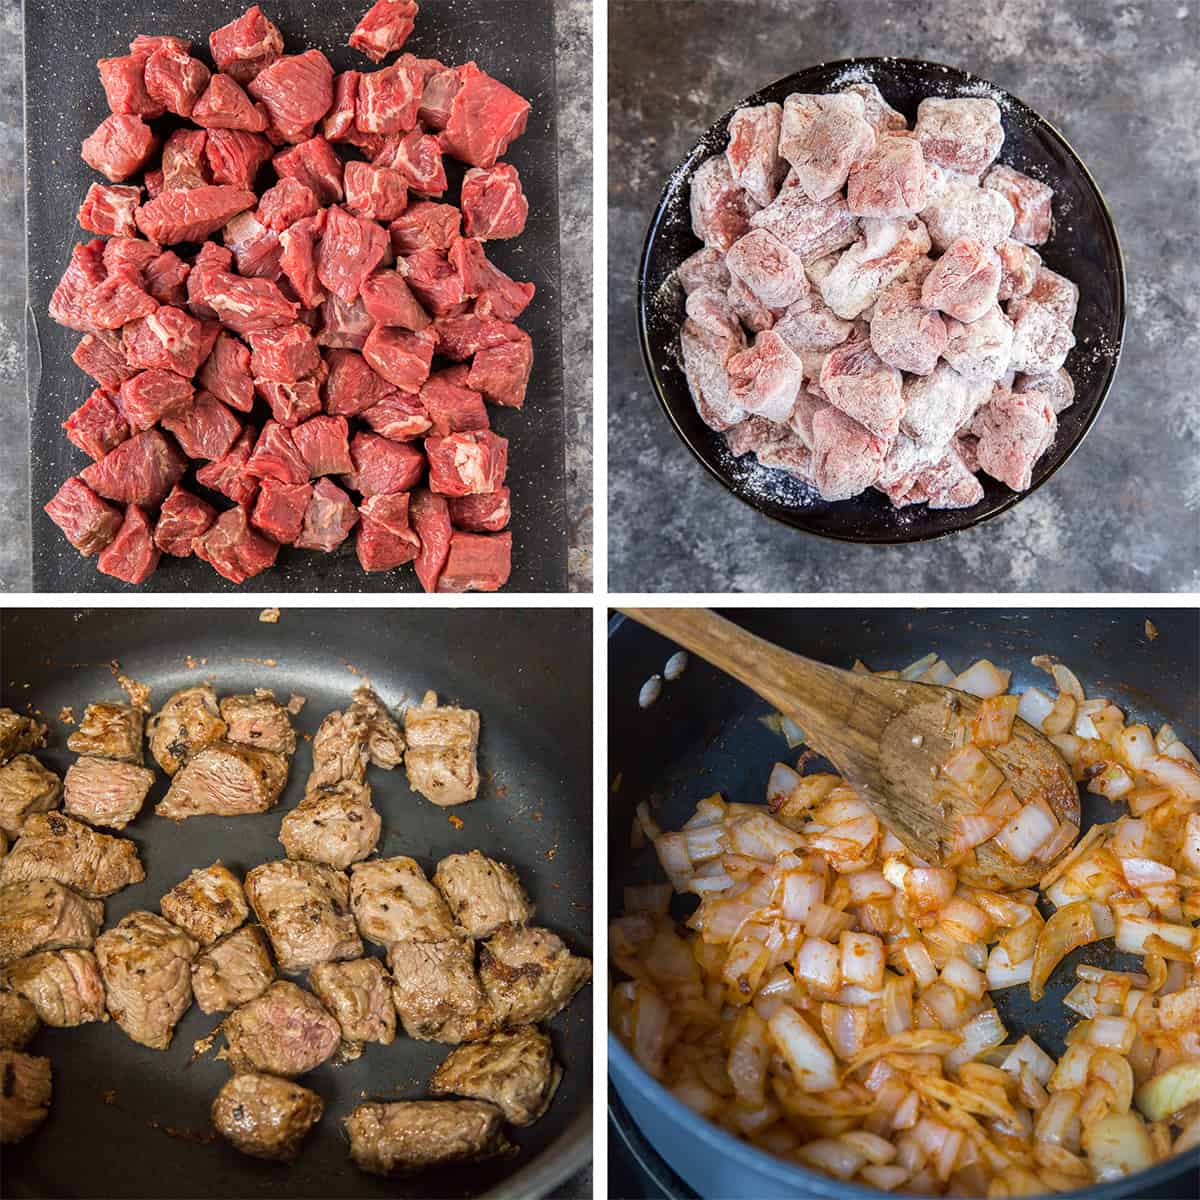 Four images of beef coated in flour and cooking in a skillet with onions and garlic.